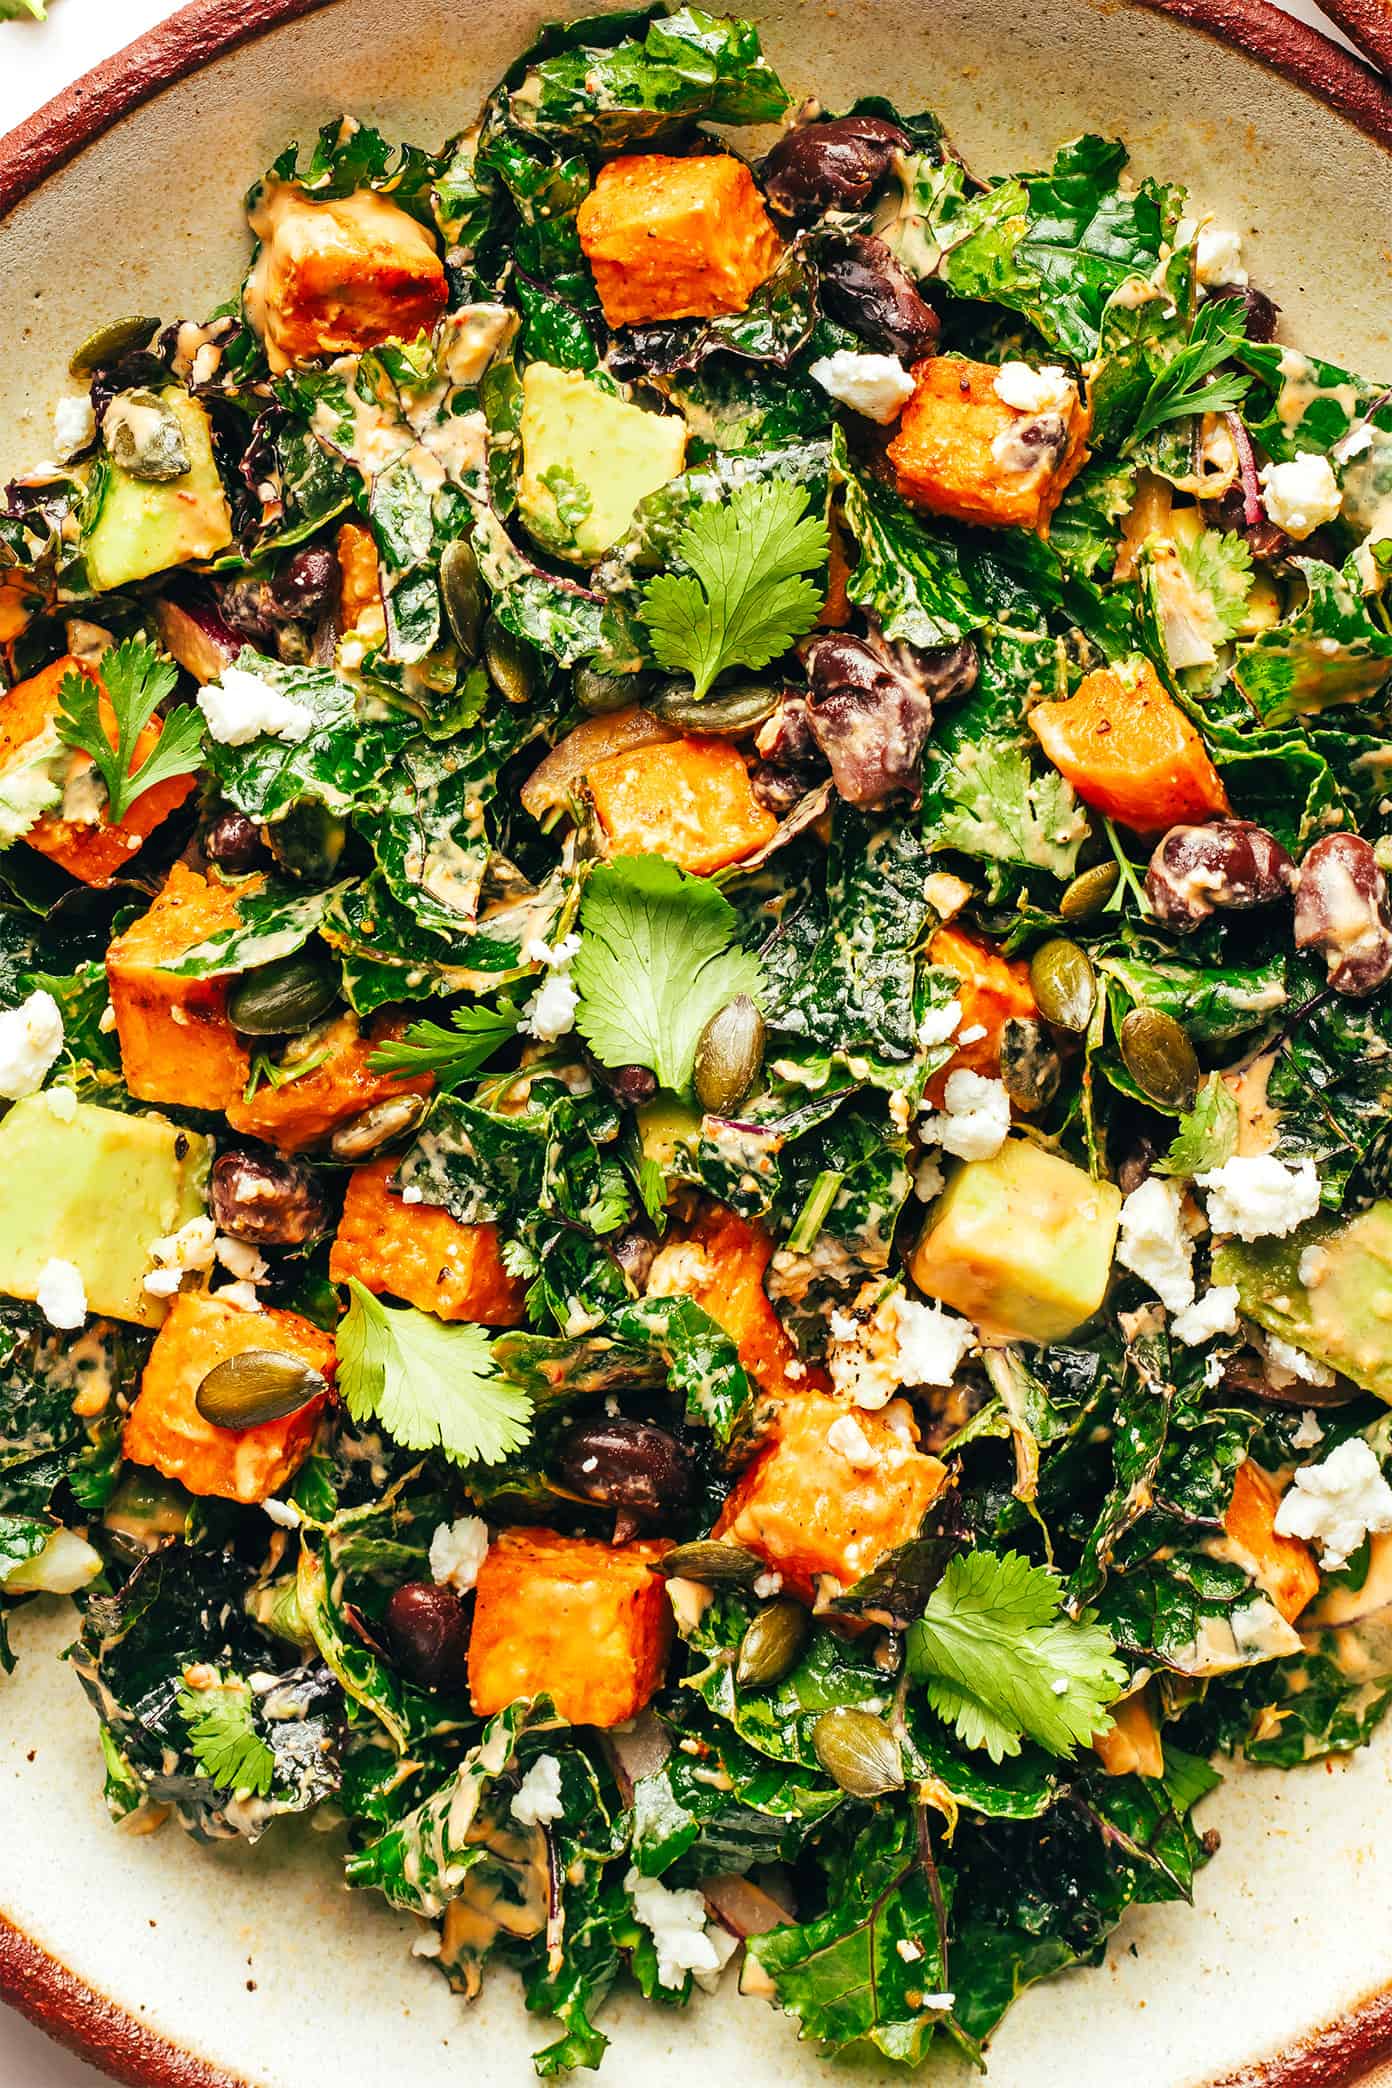 Roasted sweet potato kale salad in bowl with avocado, pepitas and chipotle tahini dressing